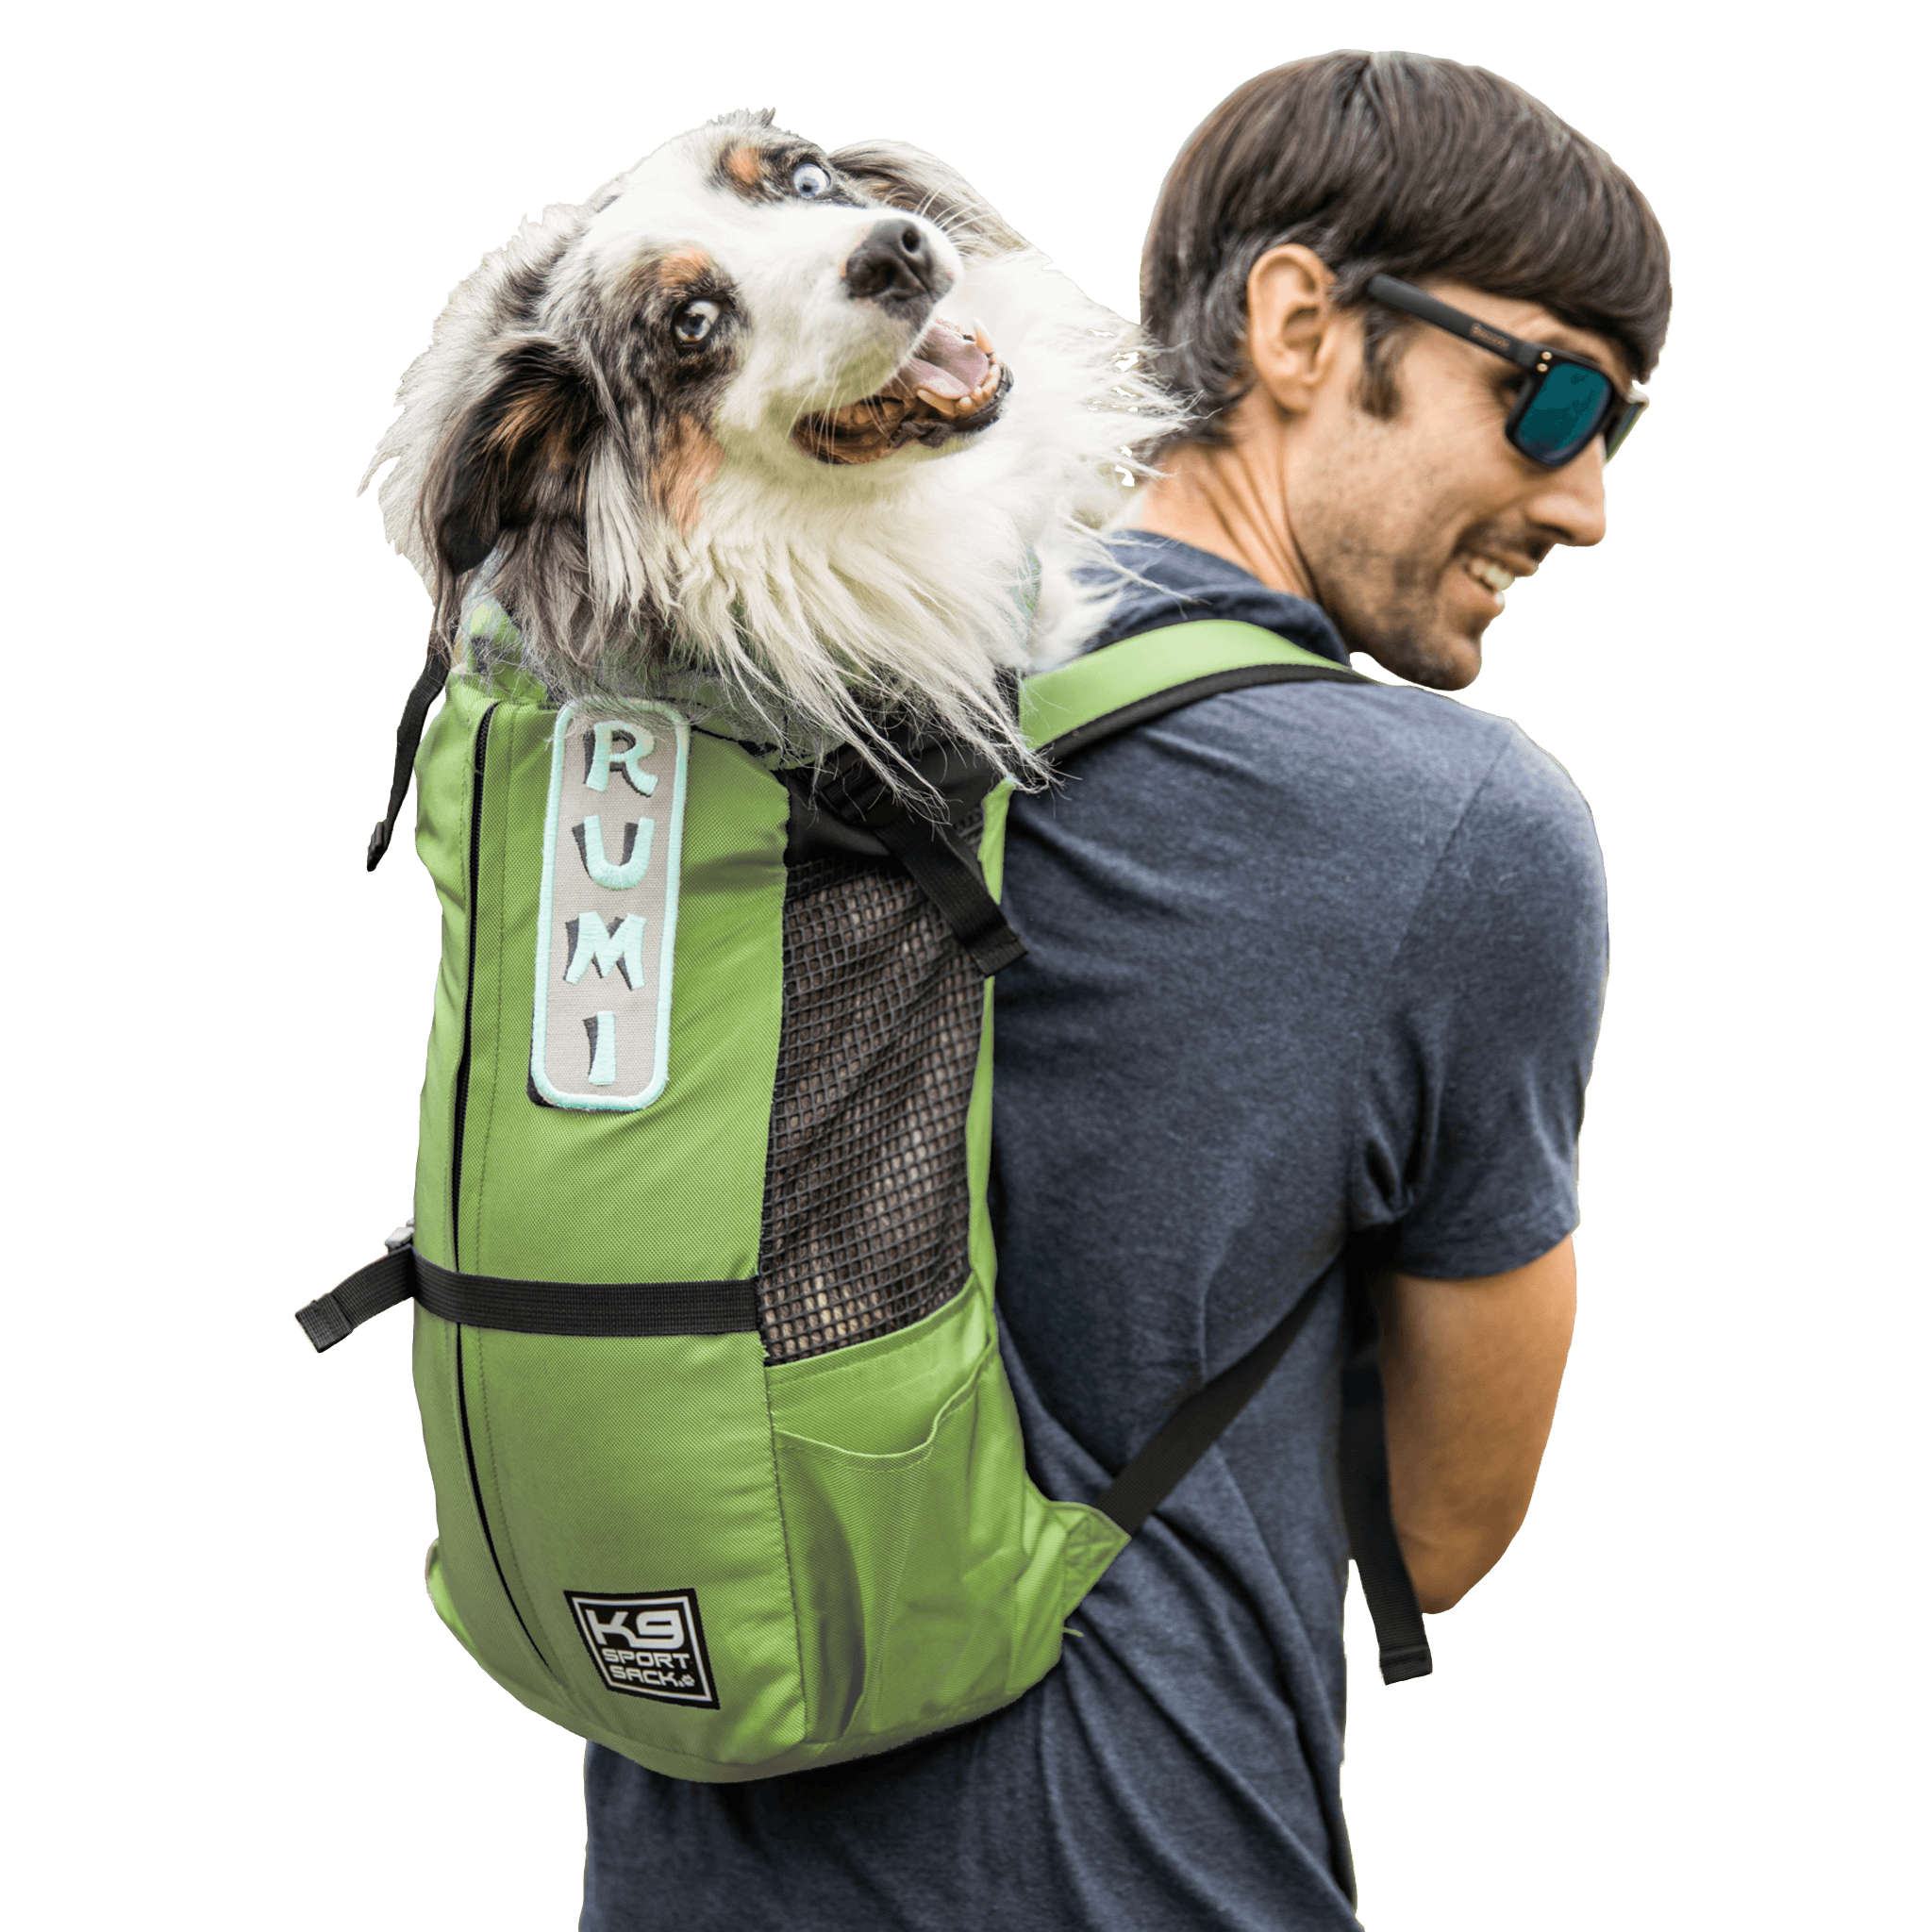 Klearance Trainer green backpack